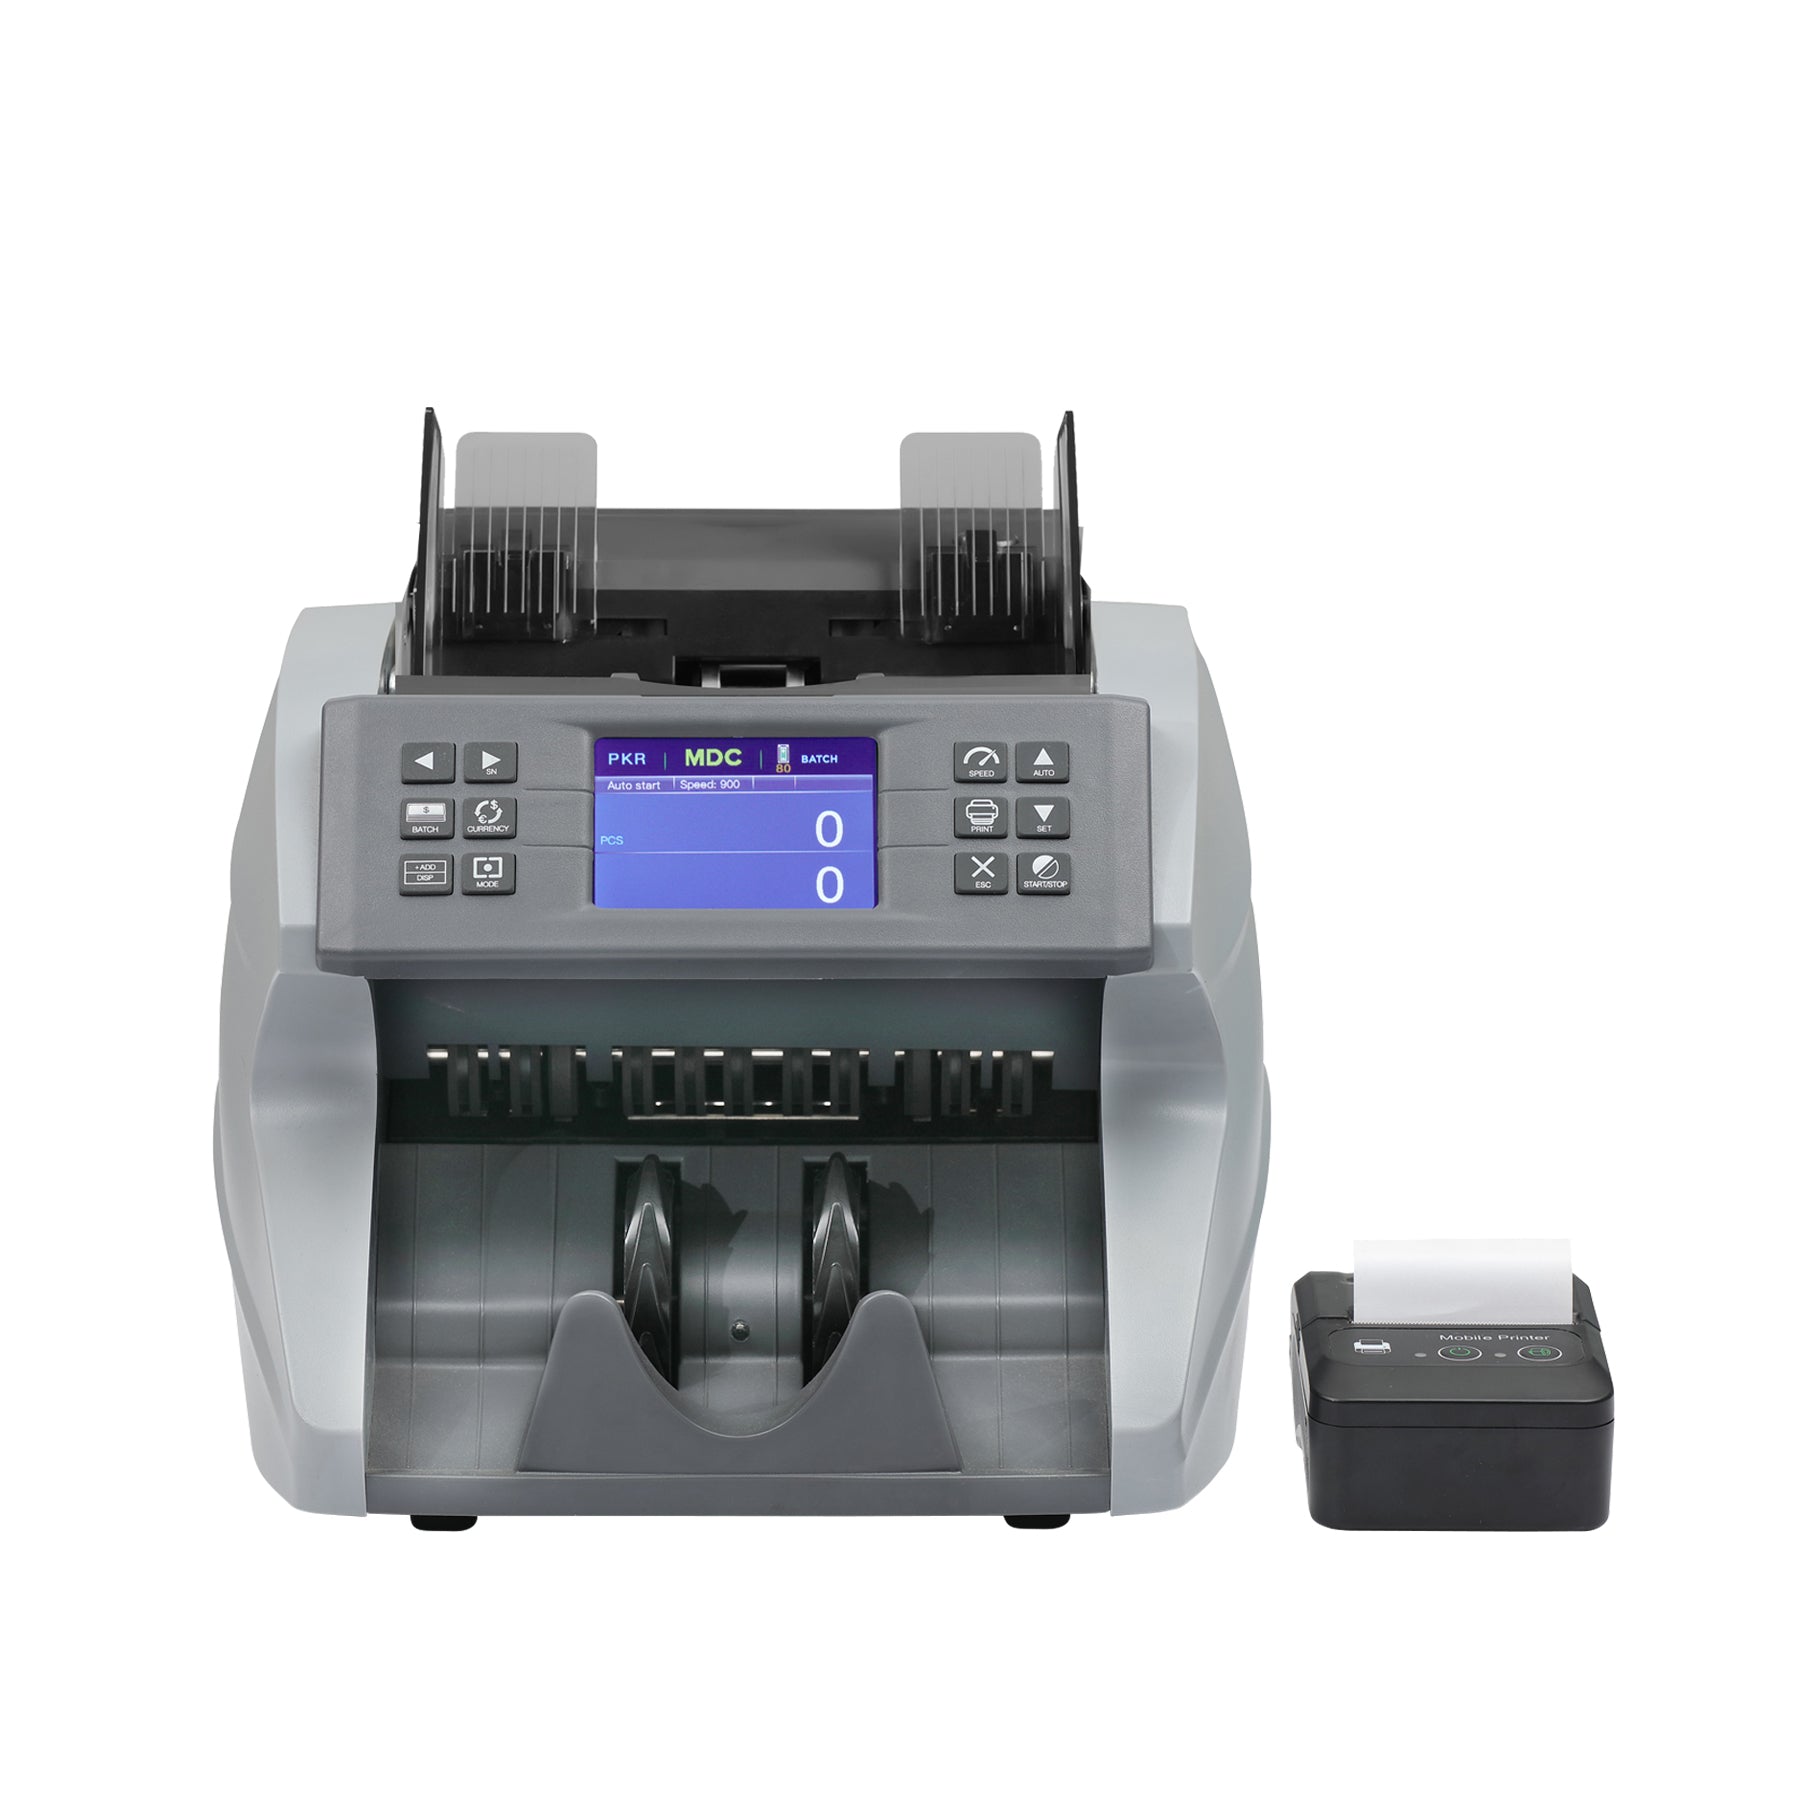 Top Loading Value Counter NW-970